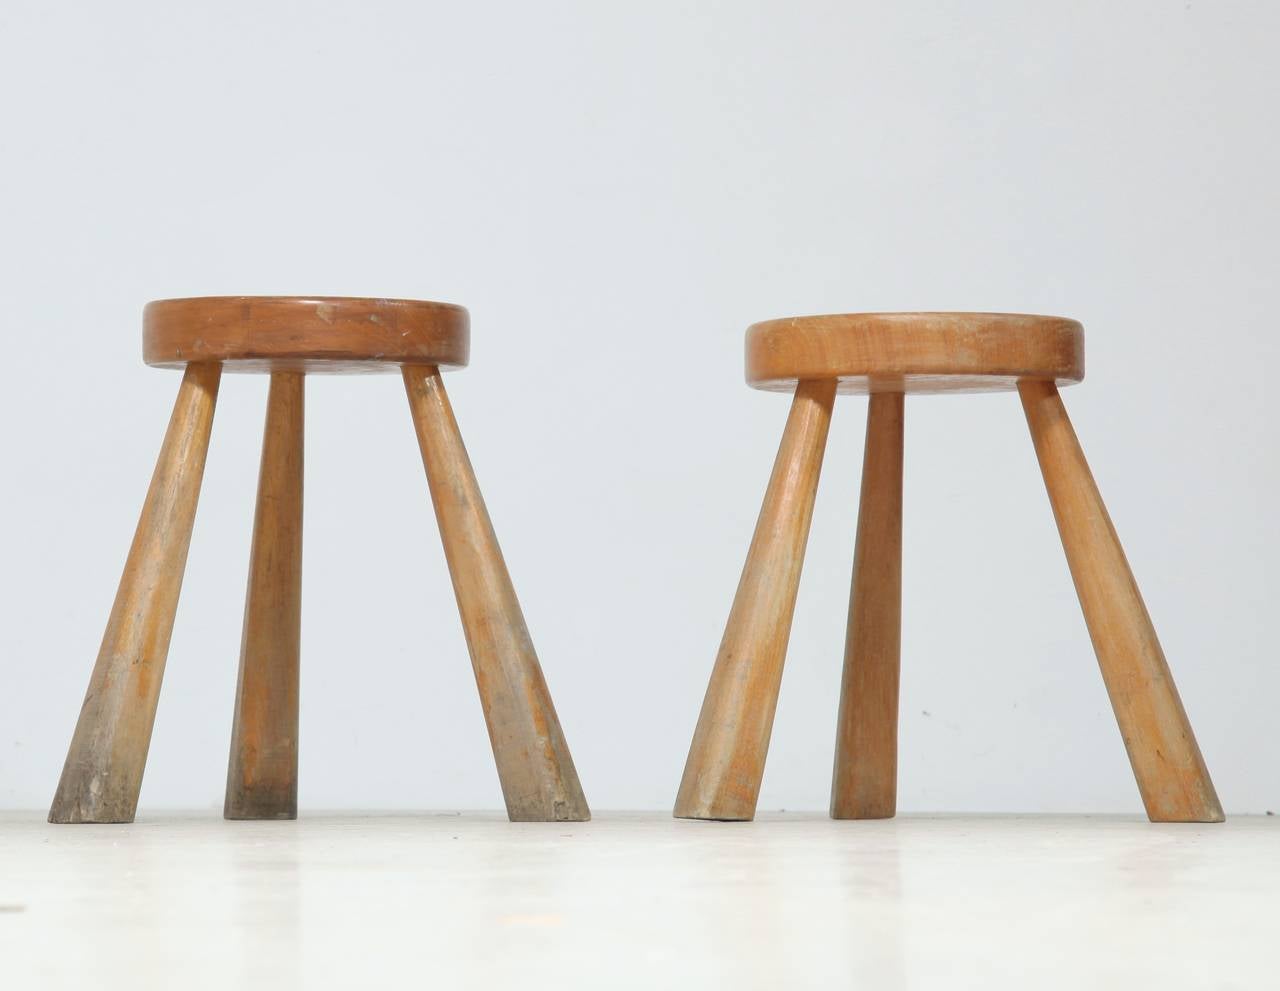 Pair of medium high Charlotte Perriand stools from Les Arcs.
Both beautiful aged, one more greyish in patina.